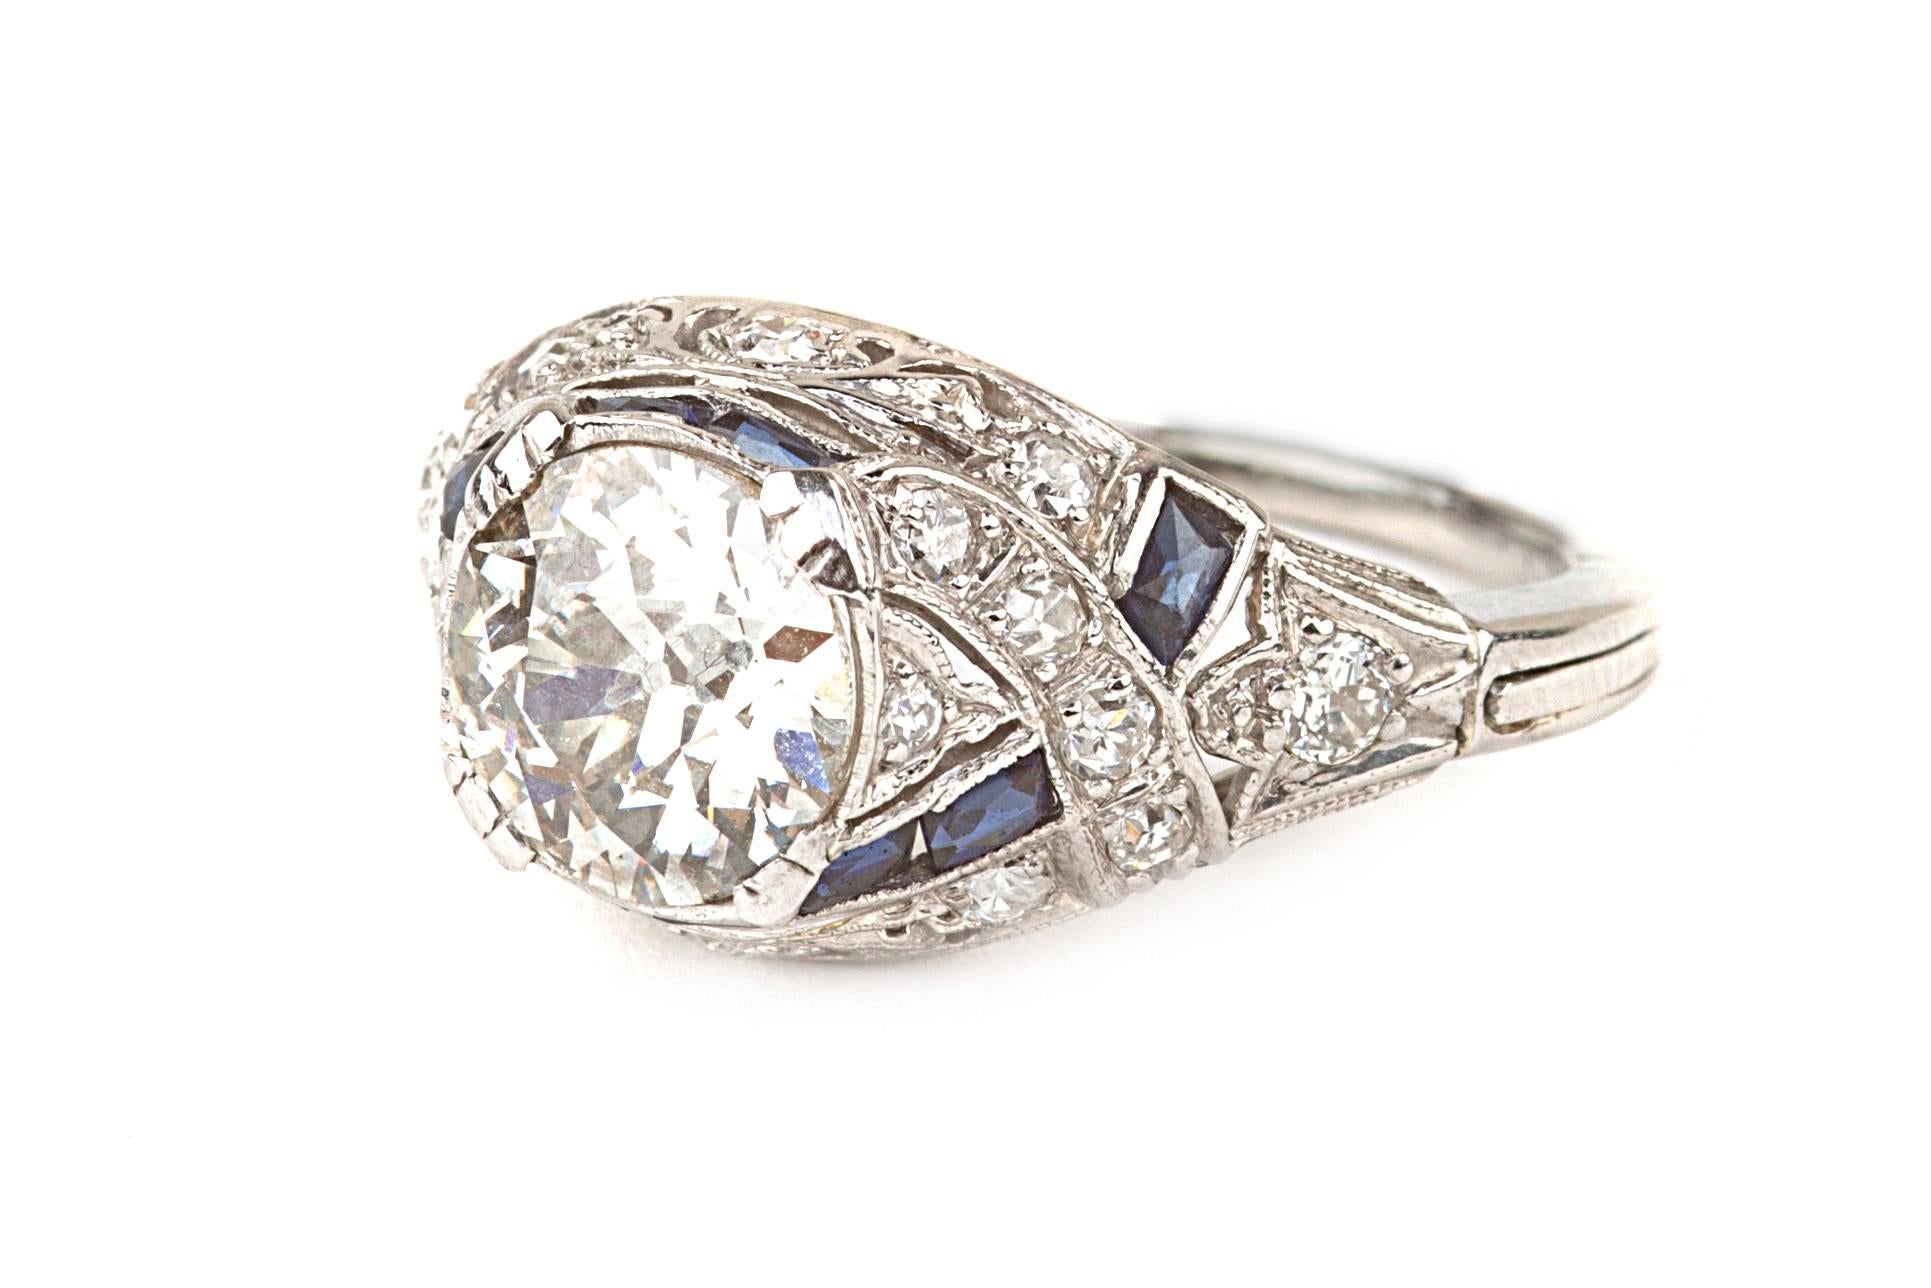 Stunning Art Deco Diamond engagement ring in platinum. The ring features an 1.58 Old European Cut Center Diamond graded I/VS2. There are .37 carats of side diamonds as well as accent sapphires. Total carat diamond weight is approximately 1.95 cttw. 